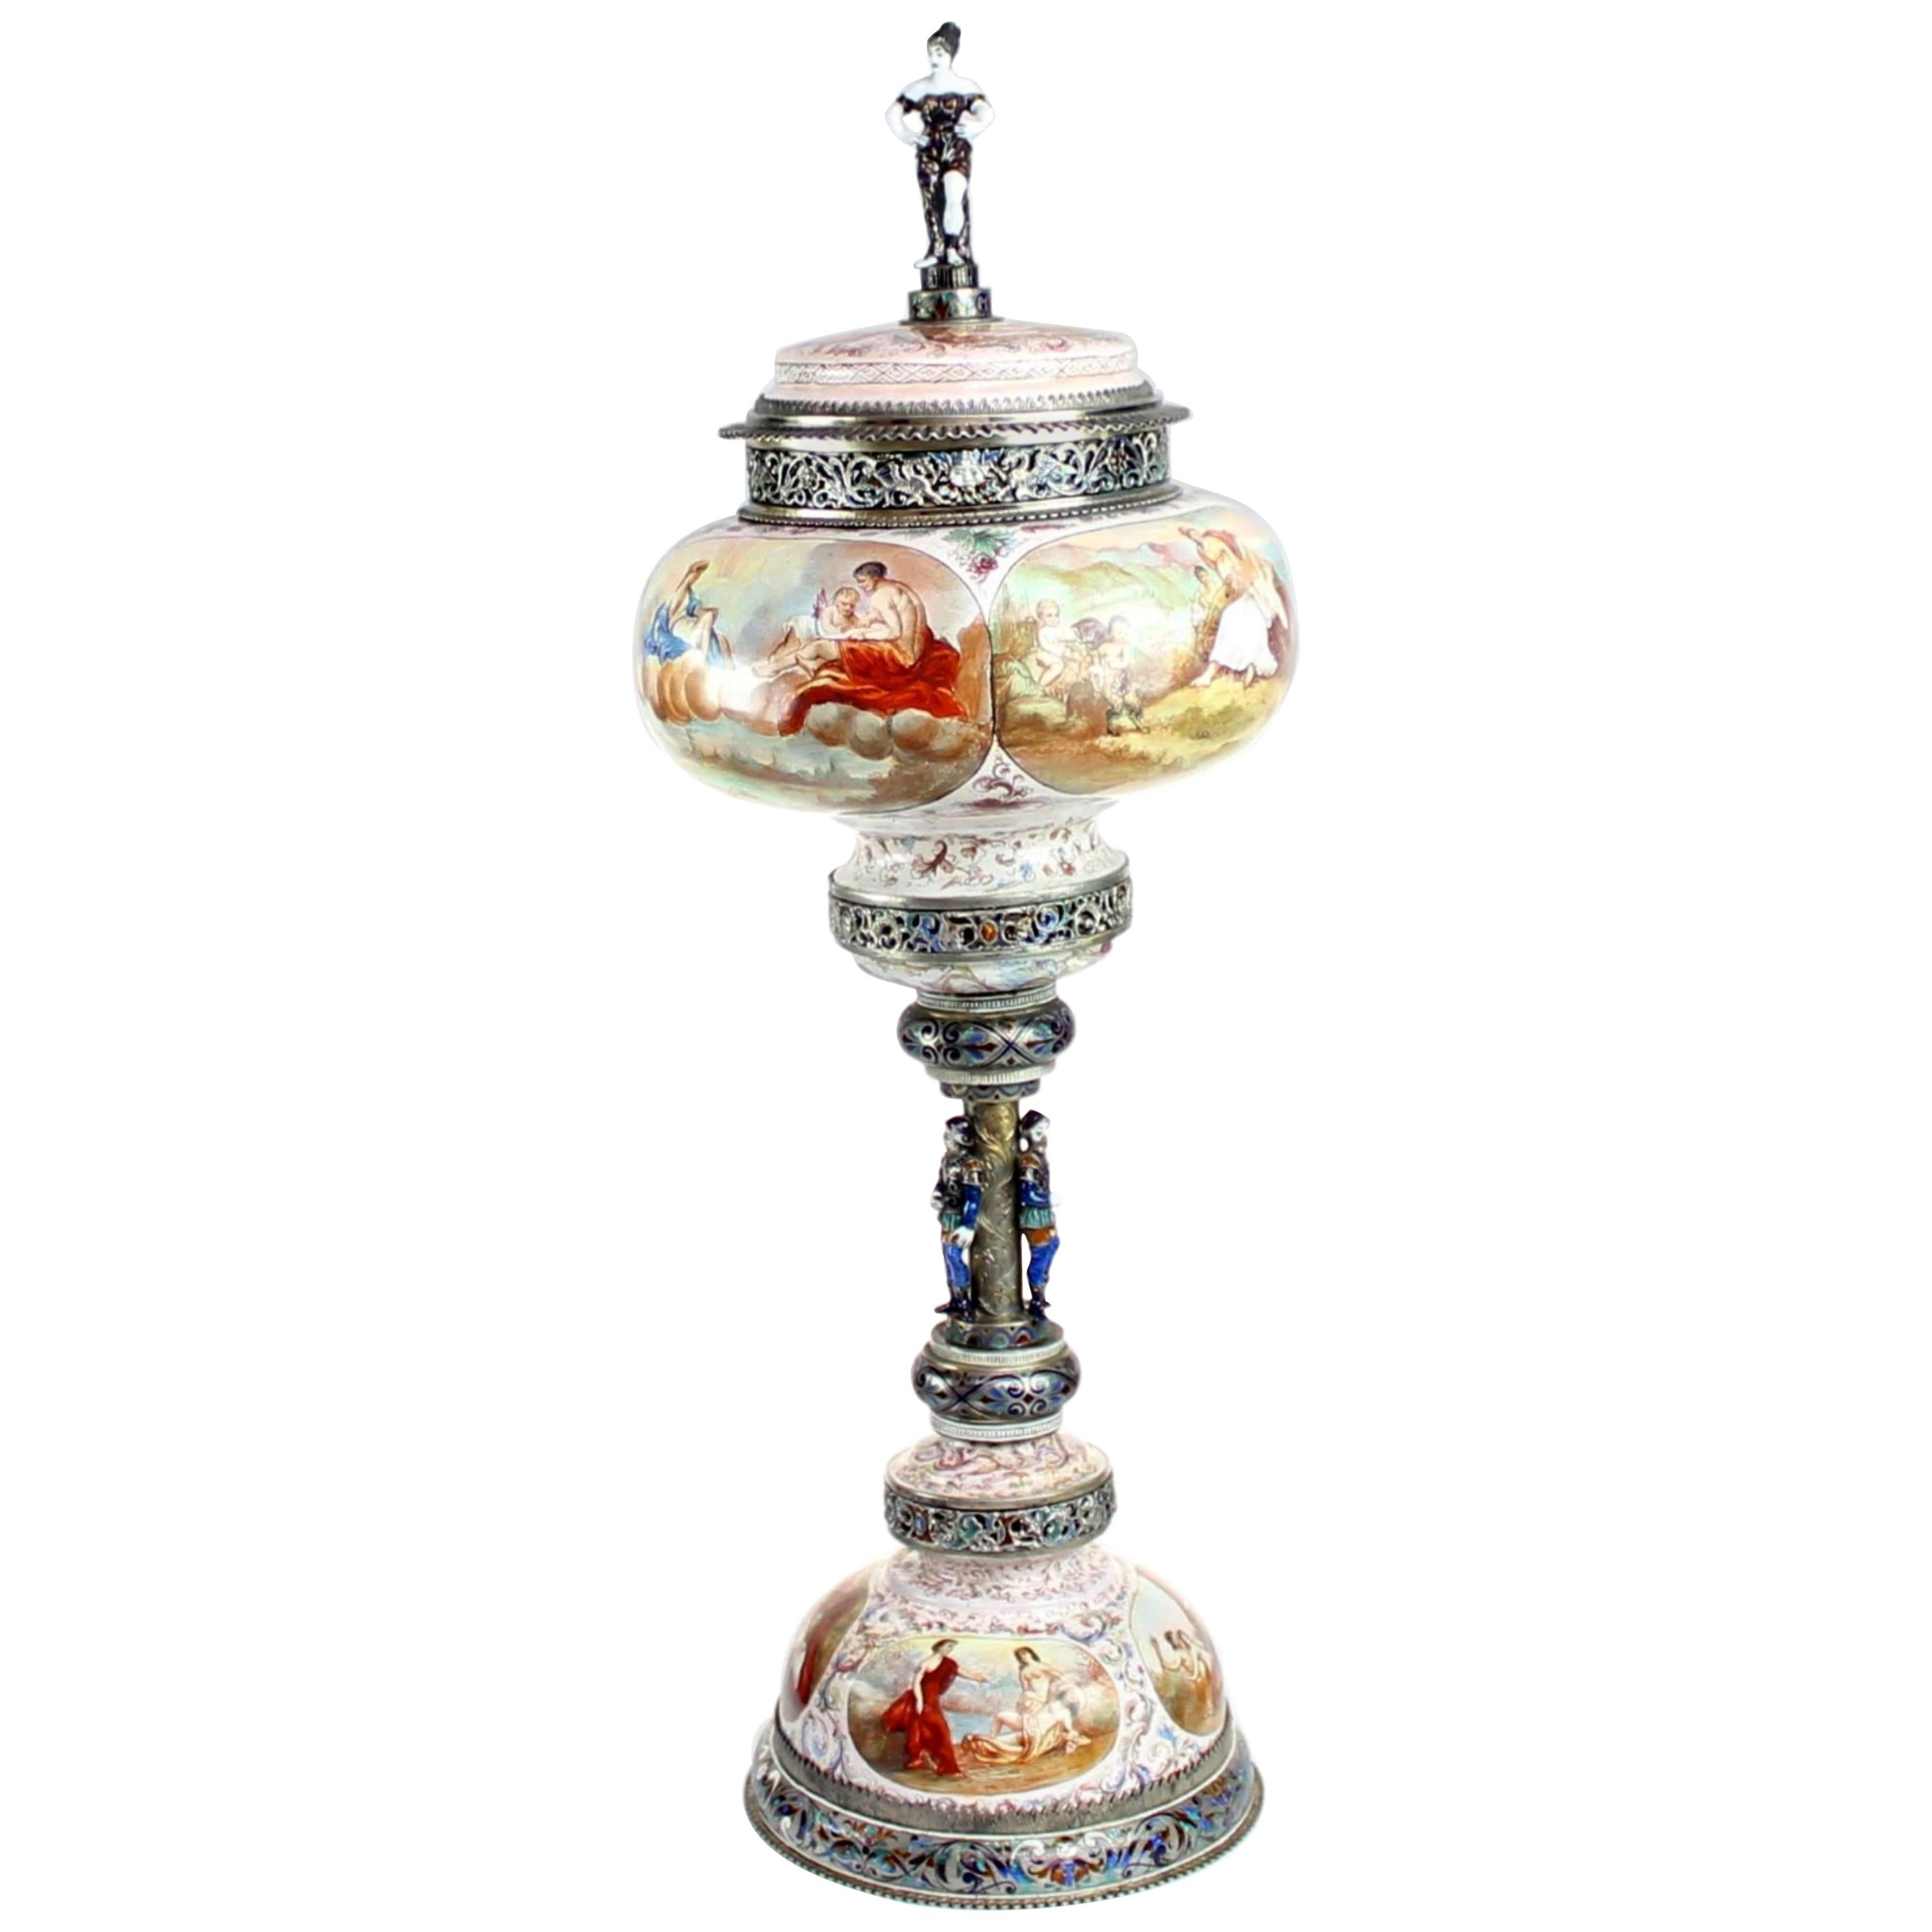 Magnificent Large Silver and Viennese Enamel Cup and Cover by Hermann Bohm, 1880